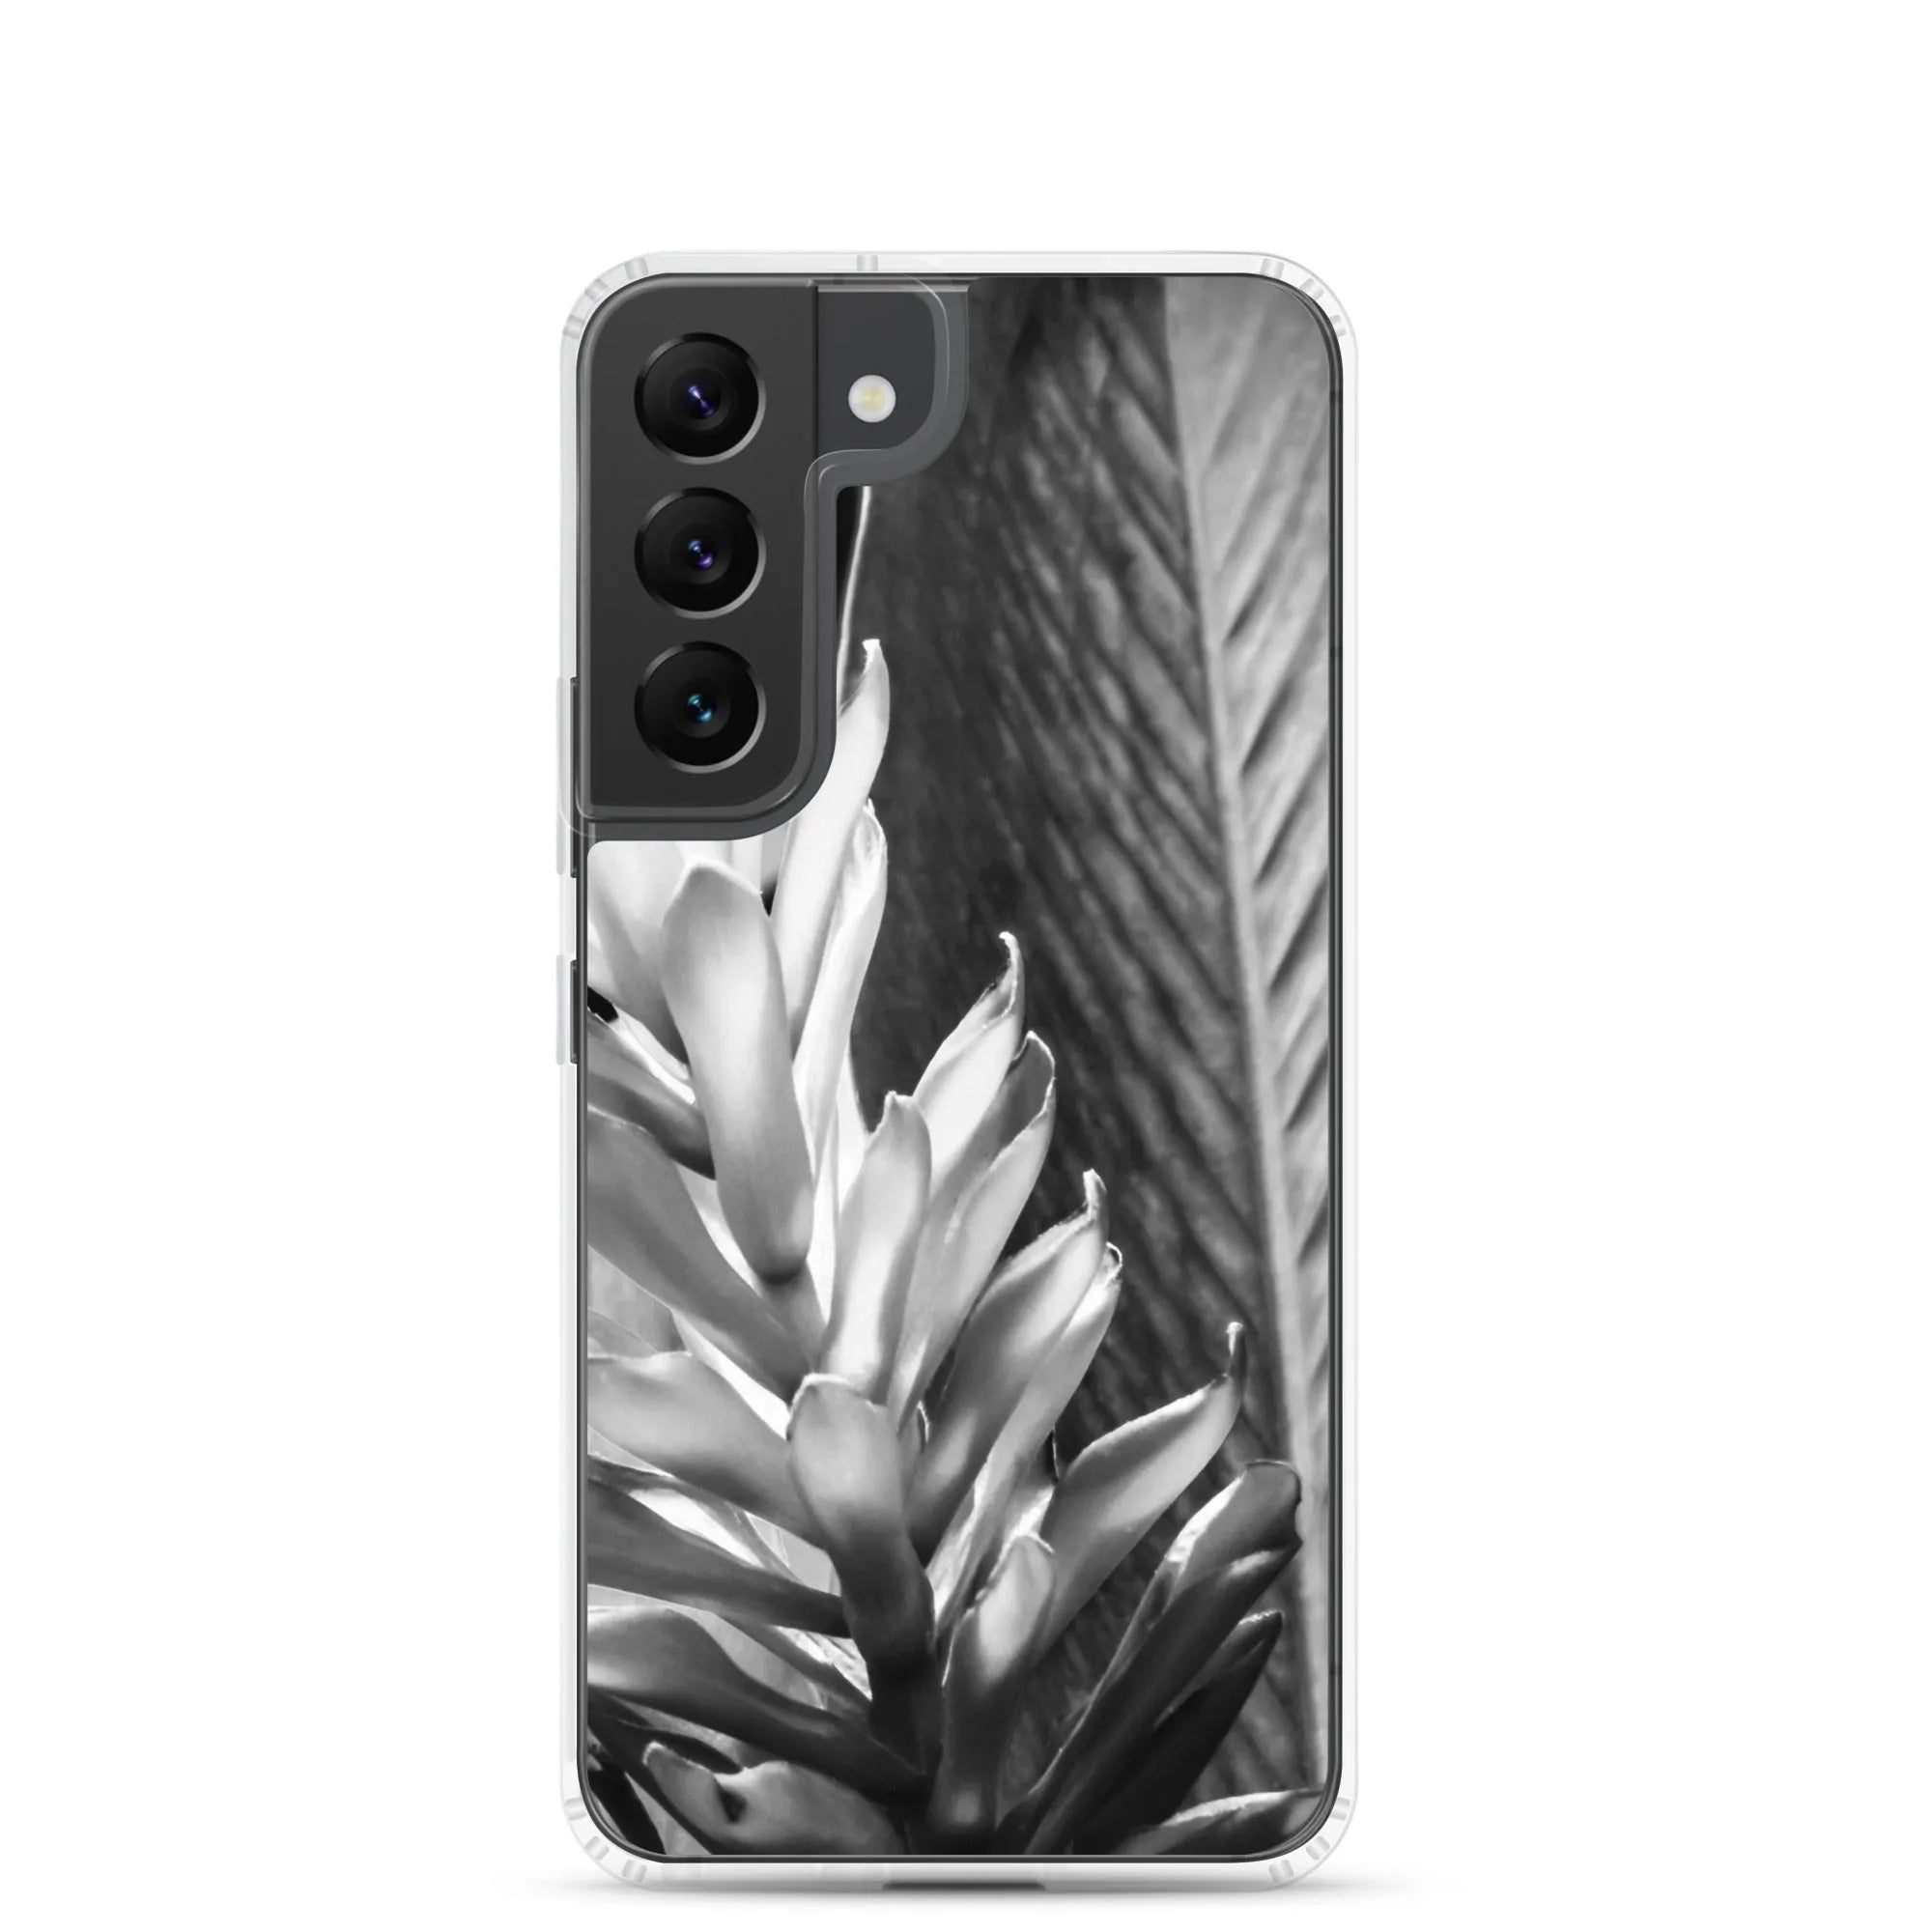 Siren Samsung Galaxy Case - Black And White - Samsung Galaxy S22 - Mobile Phone Cases - Aesthetic Art